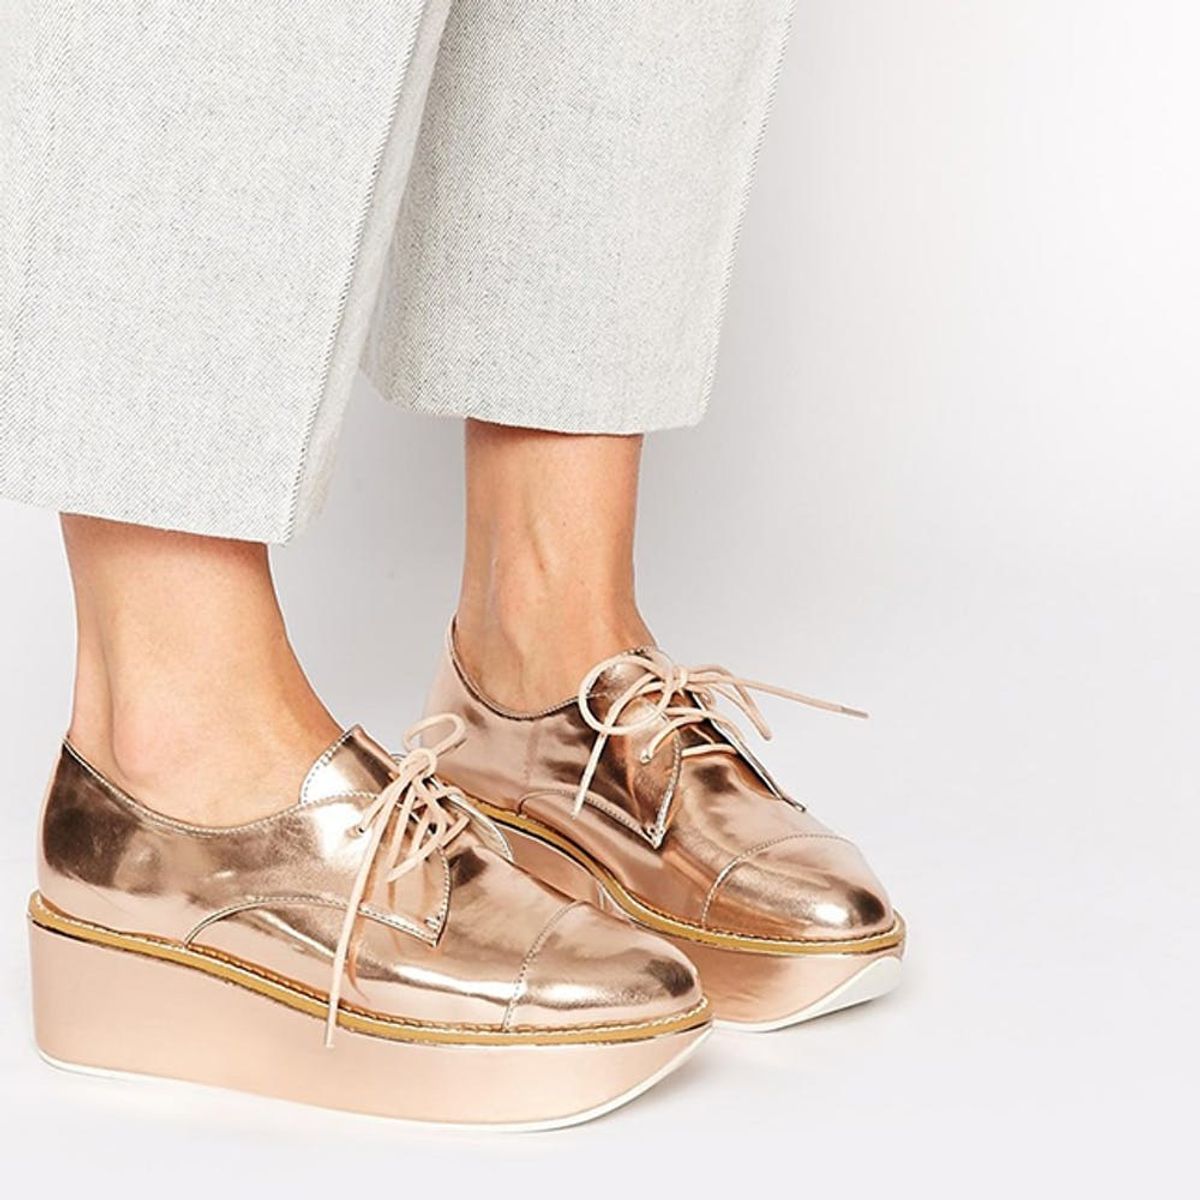 15 Shoes to Make Your Work Week More Stylish